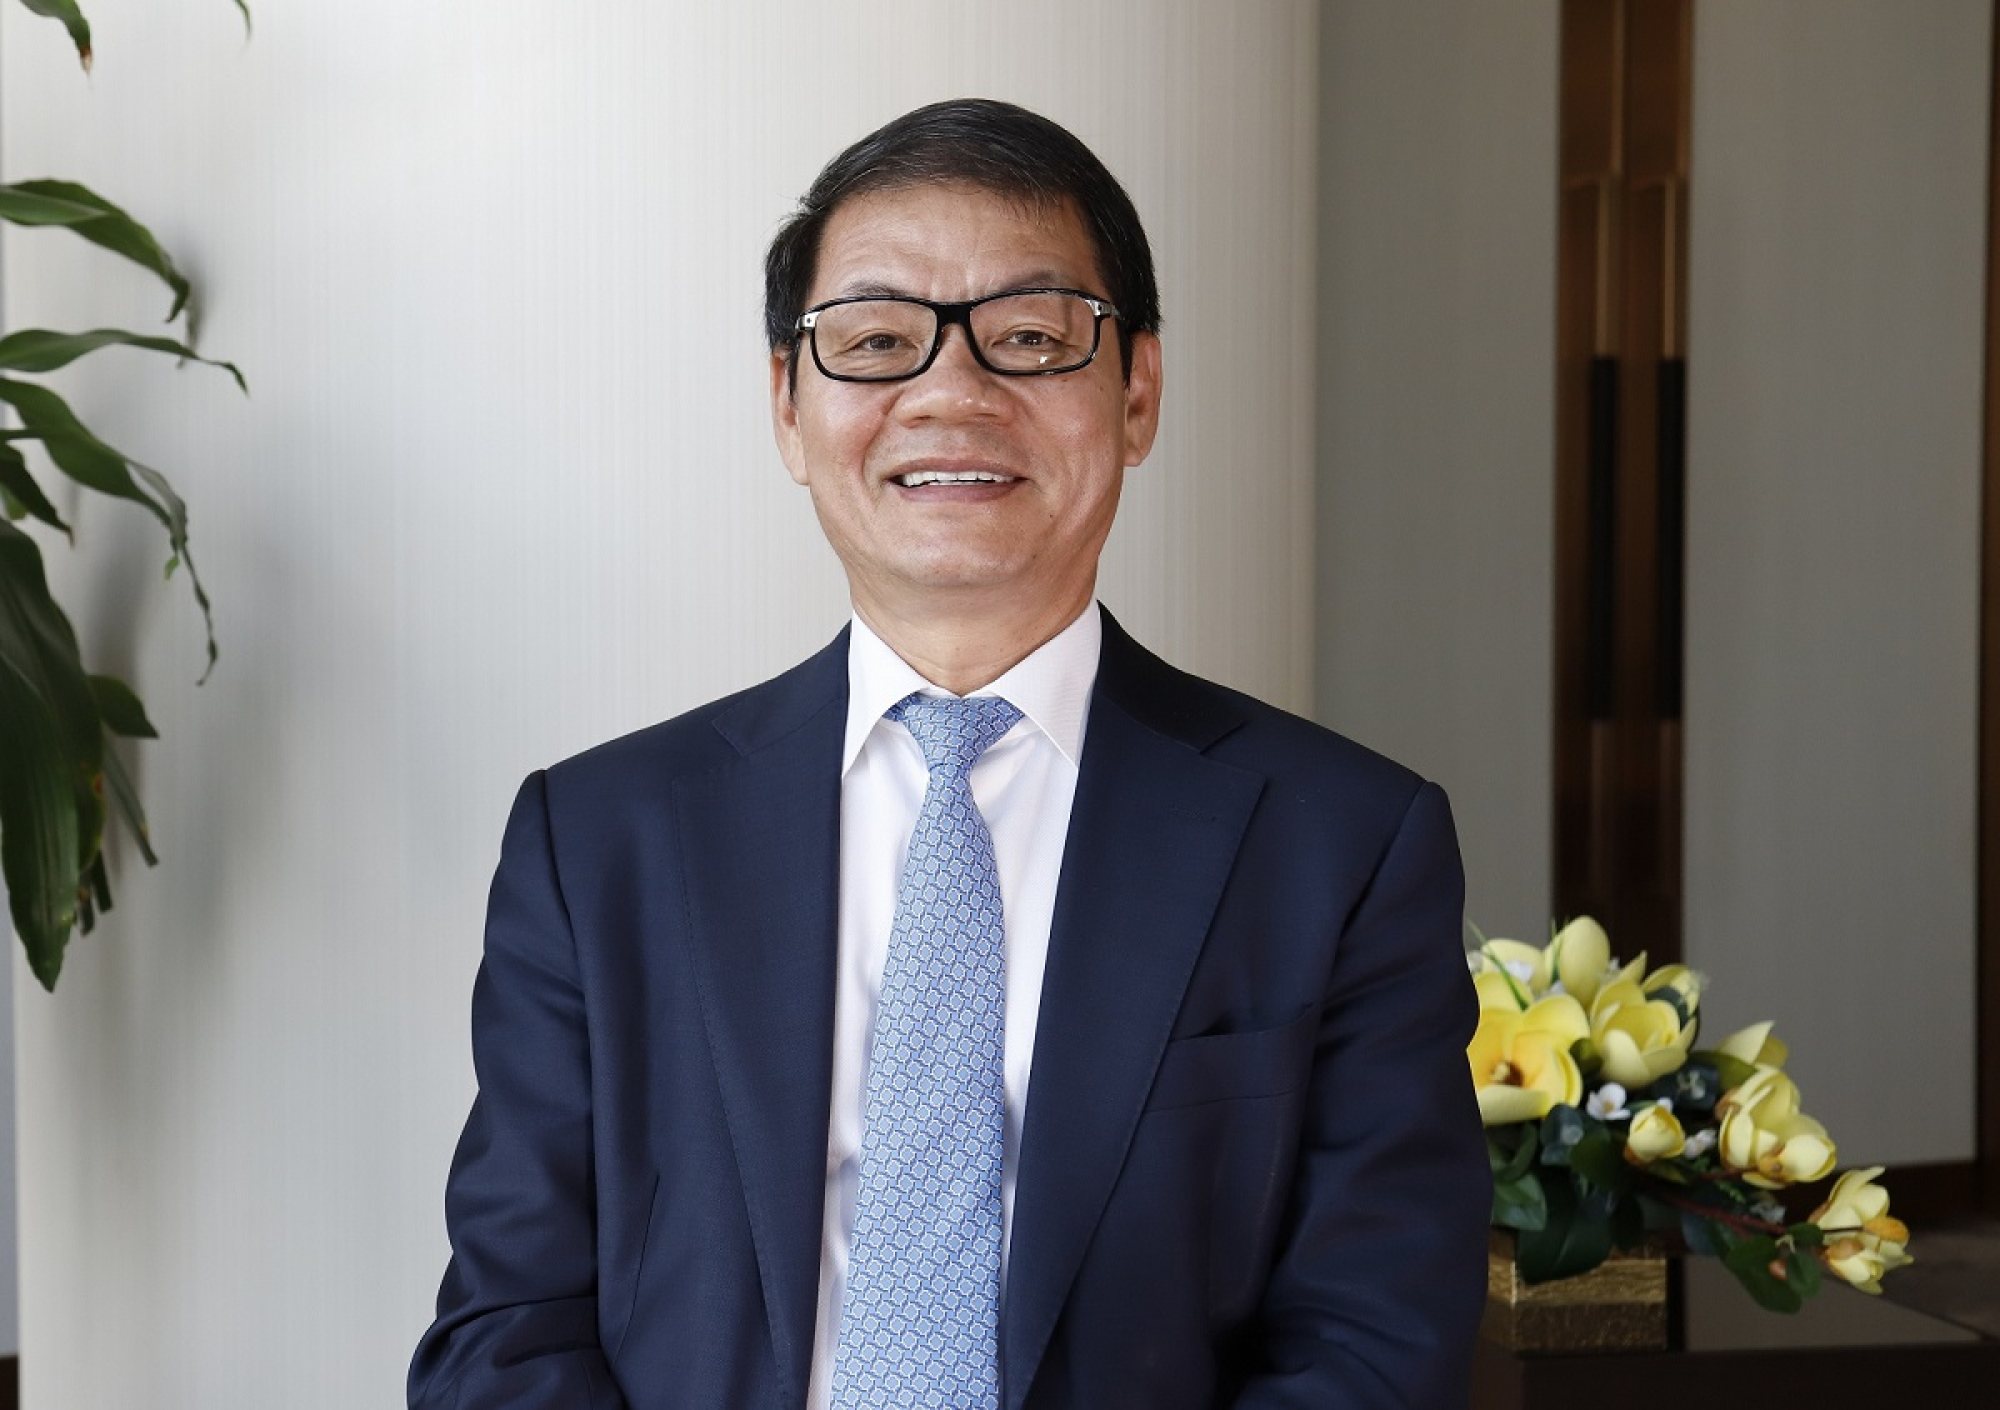 vietnam’s 5 richest billionaires in 2024 – net worths, ranked: from vietjet air boss nguyen thi phuong thao to techcombank’s ho hung anh – but which self-made man’s career started in a car factory?